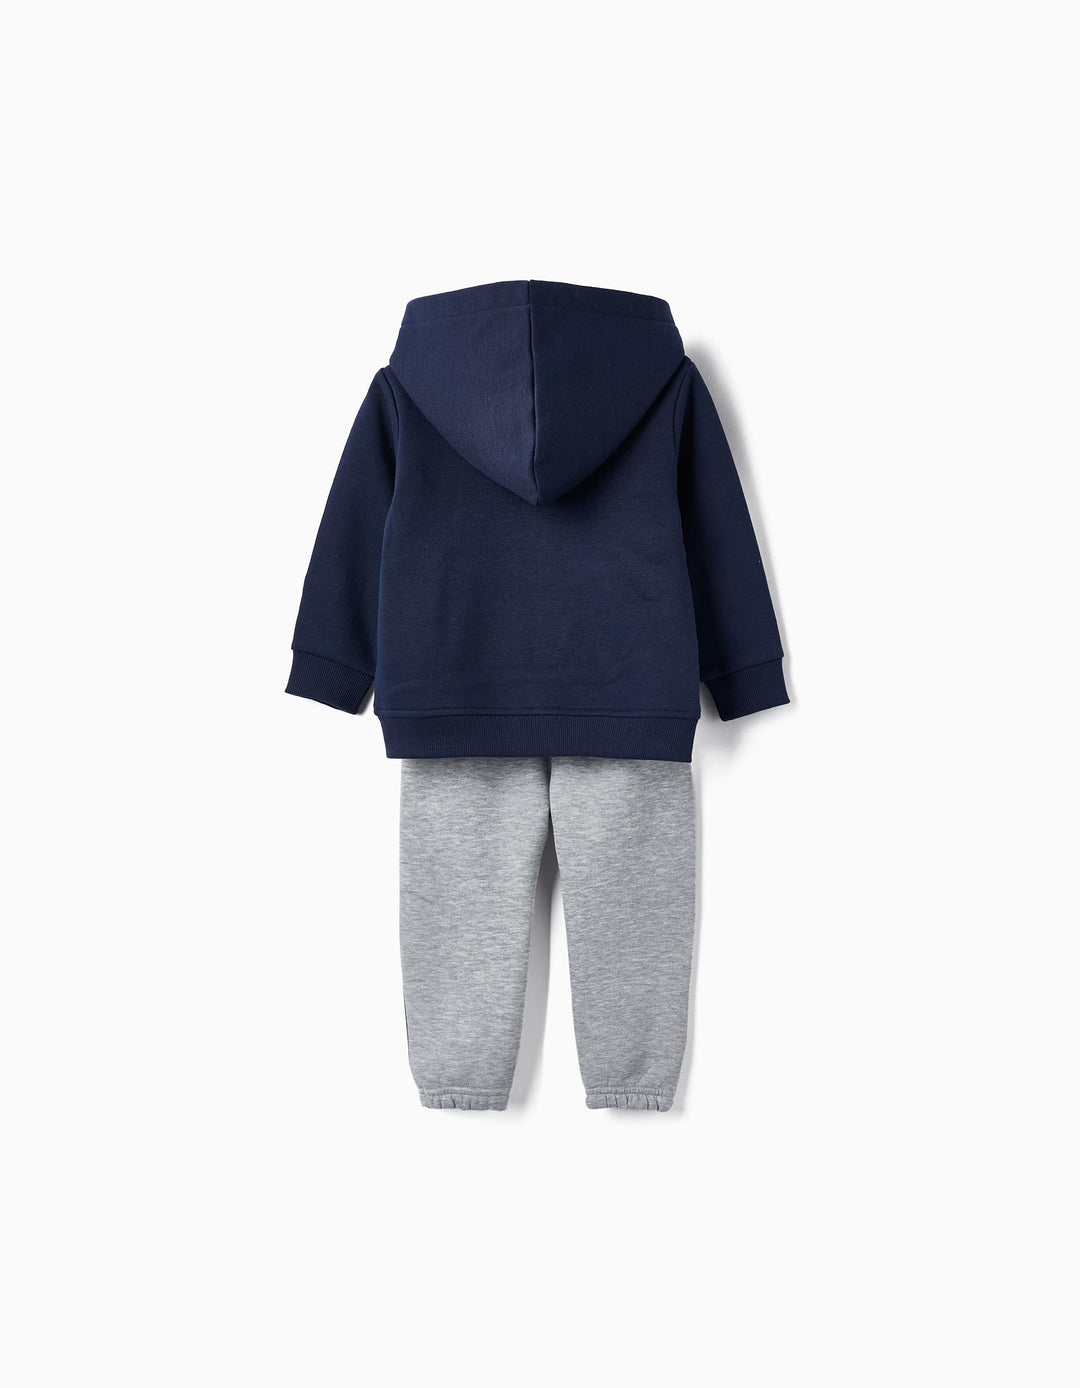 Tracksuit for Baby Boys 'Animals', Blue/Light Grey